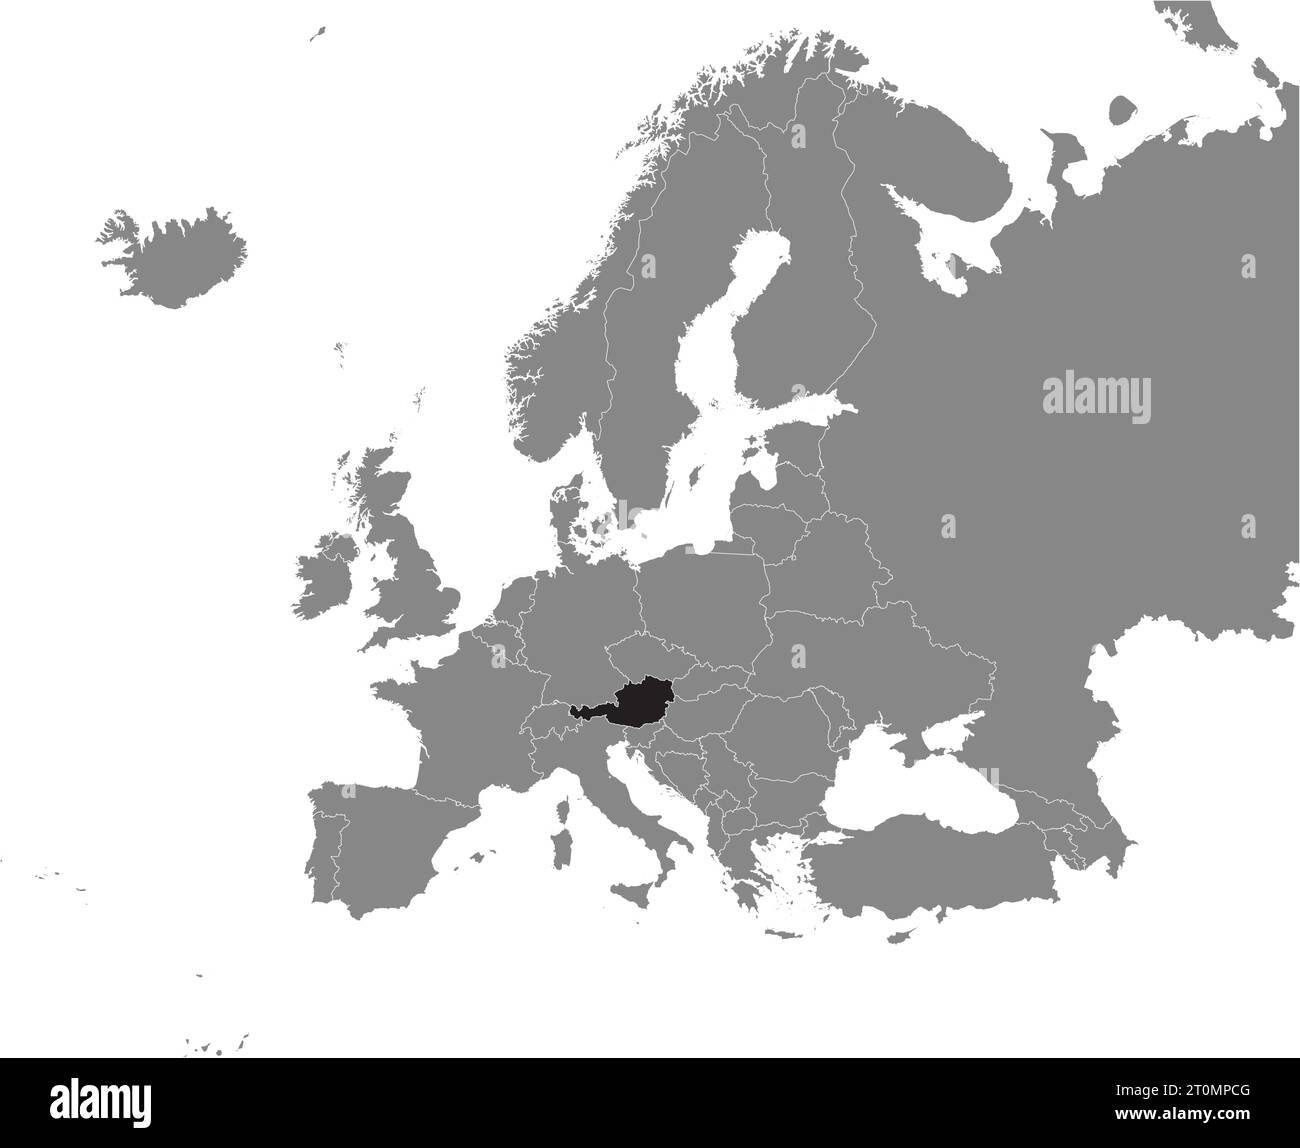 Location map of the REPUBLIC OF AUSTRIA, EUROPE Stock Vector